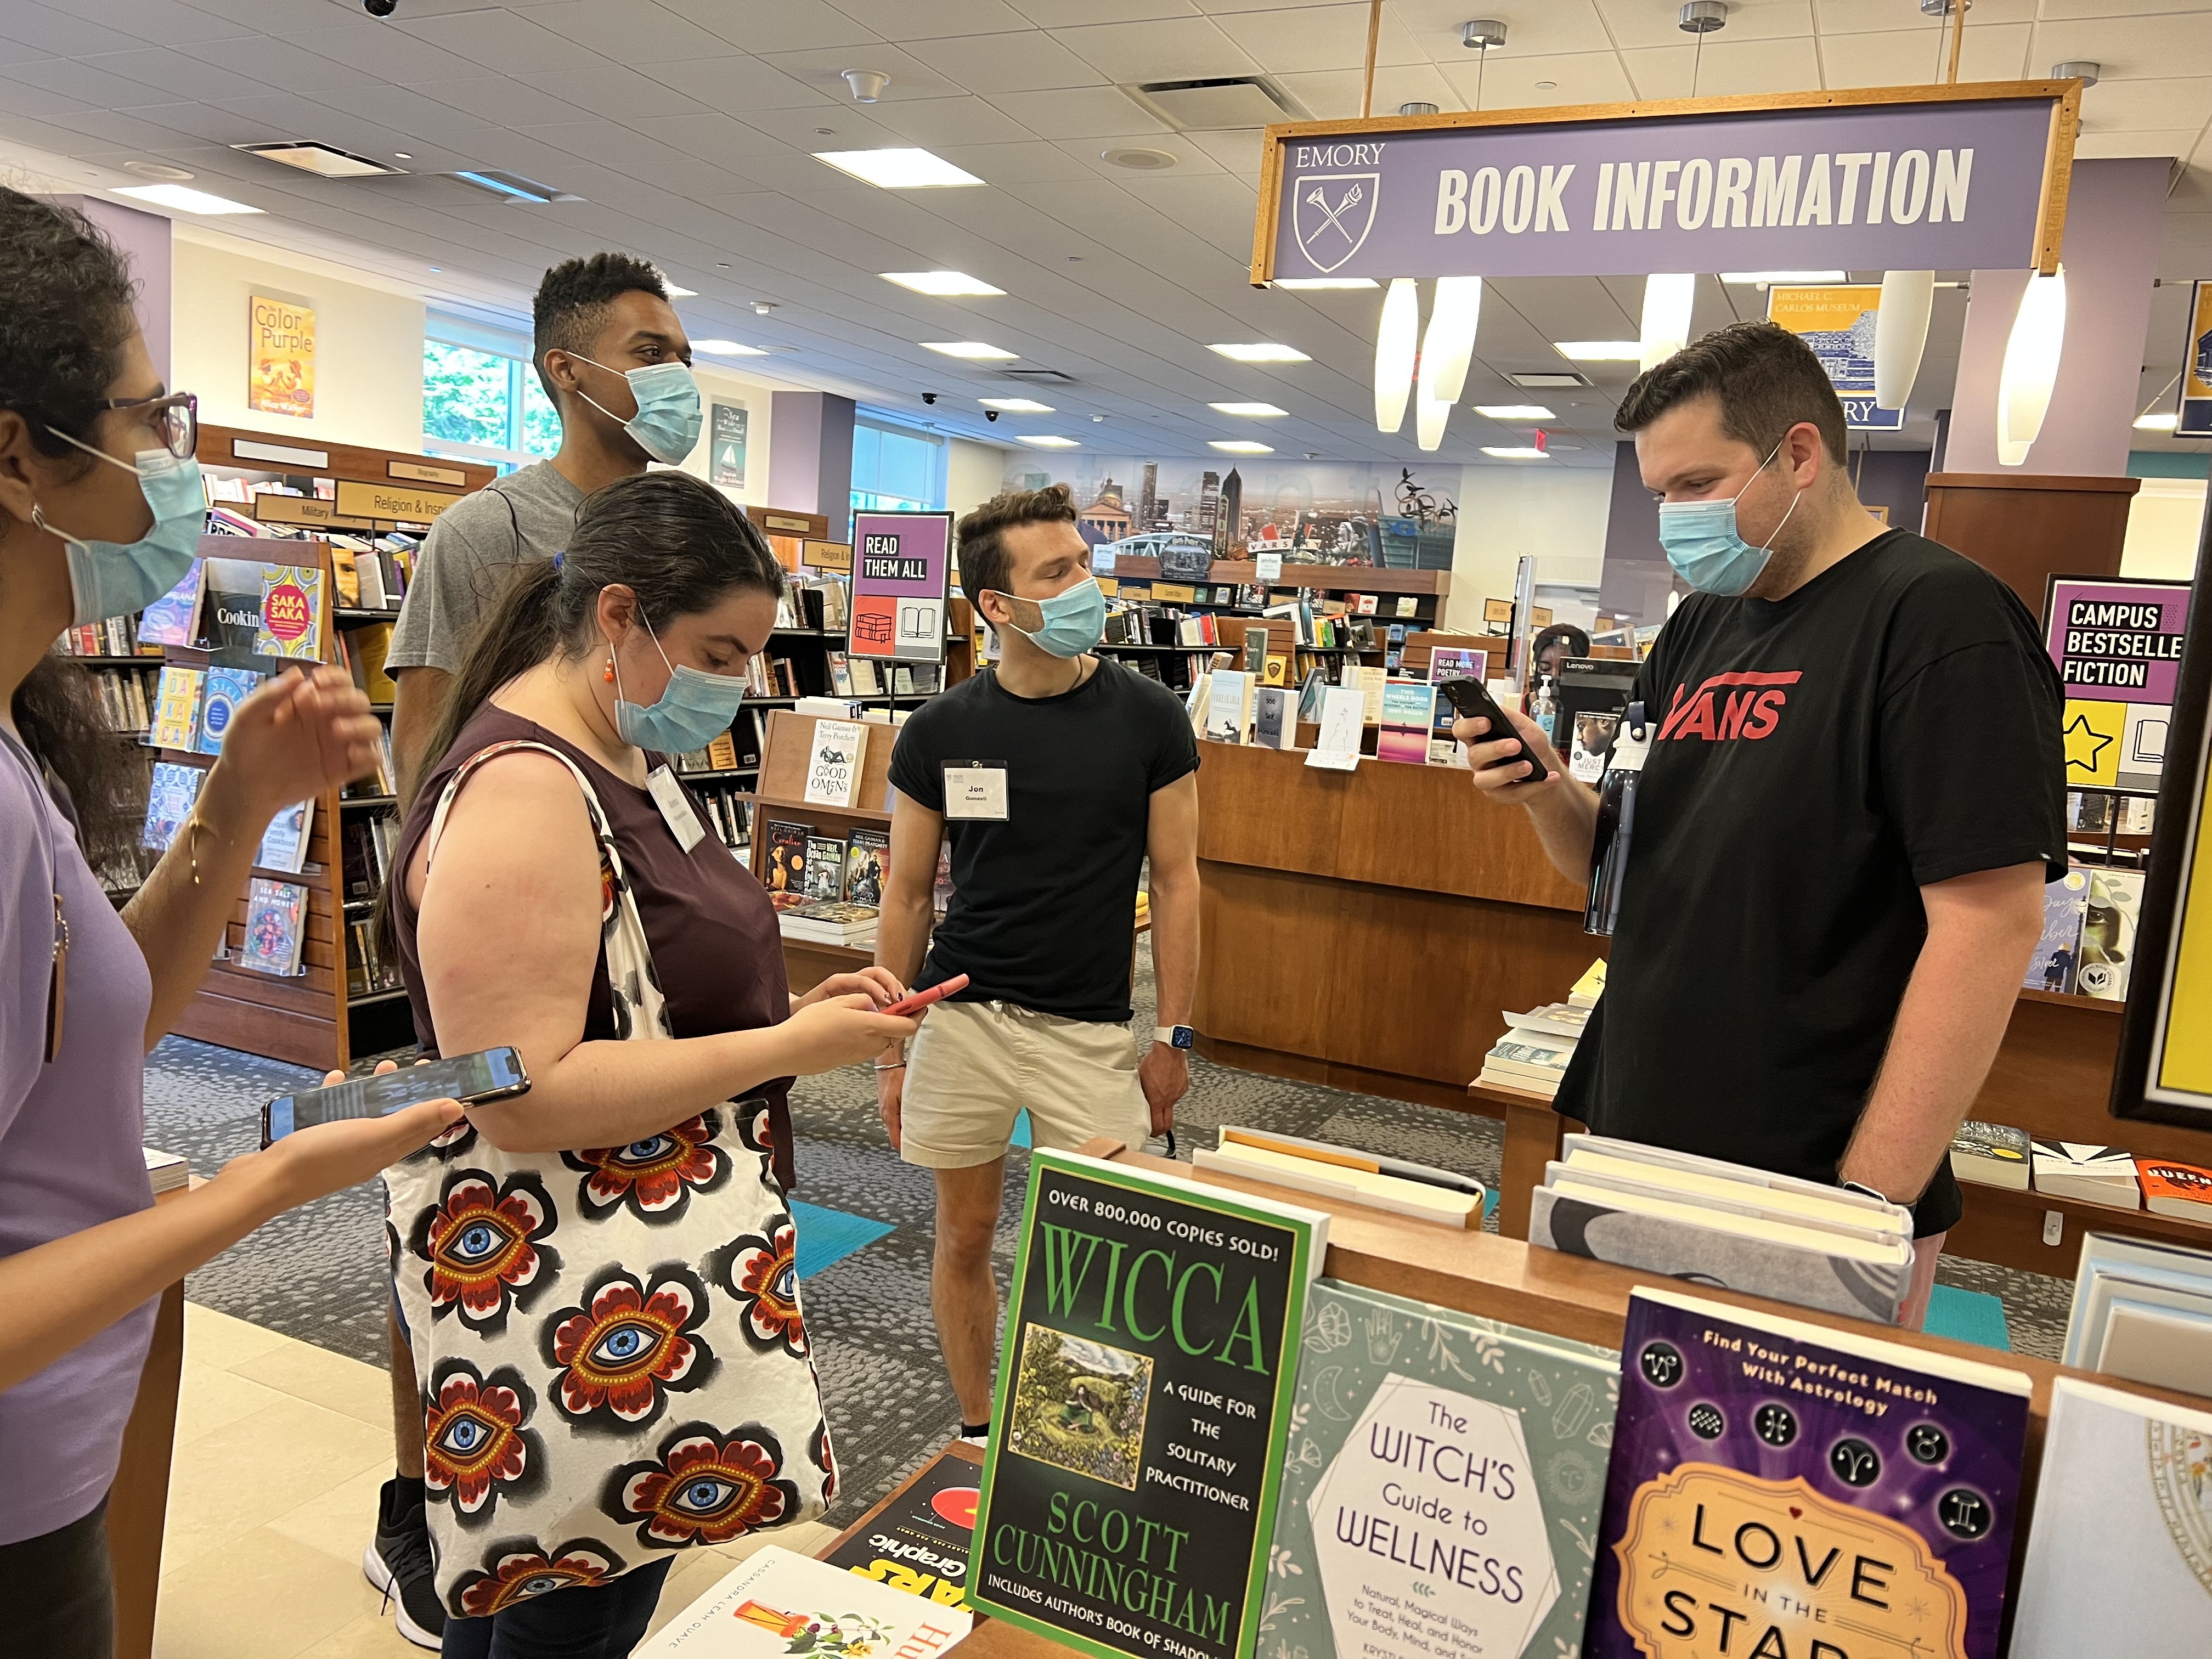 5 adults standing in a book store most holding phones